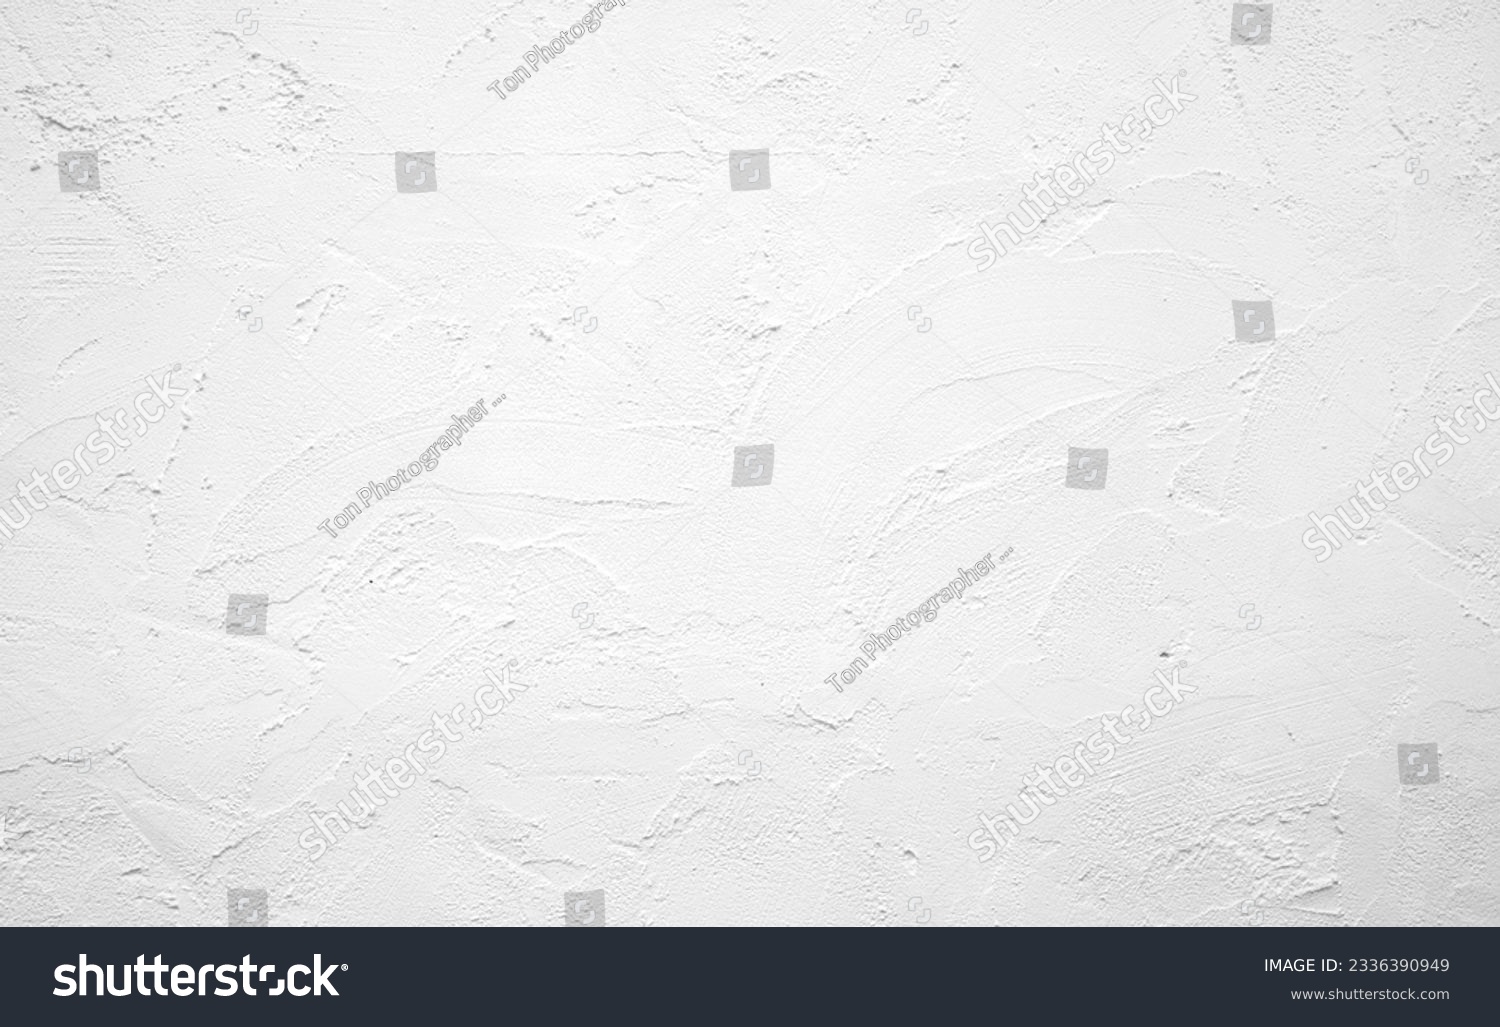 White wall concrete texture rough. Beautiful patterned white wall texture background pattern. abstract background concept #2336390949